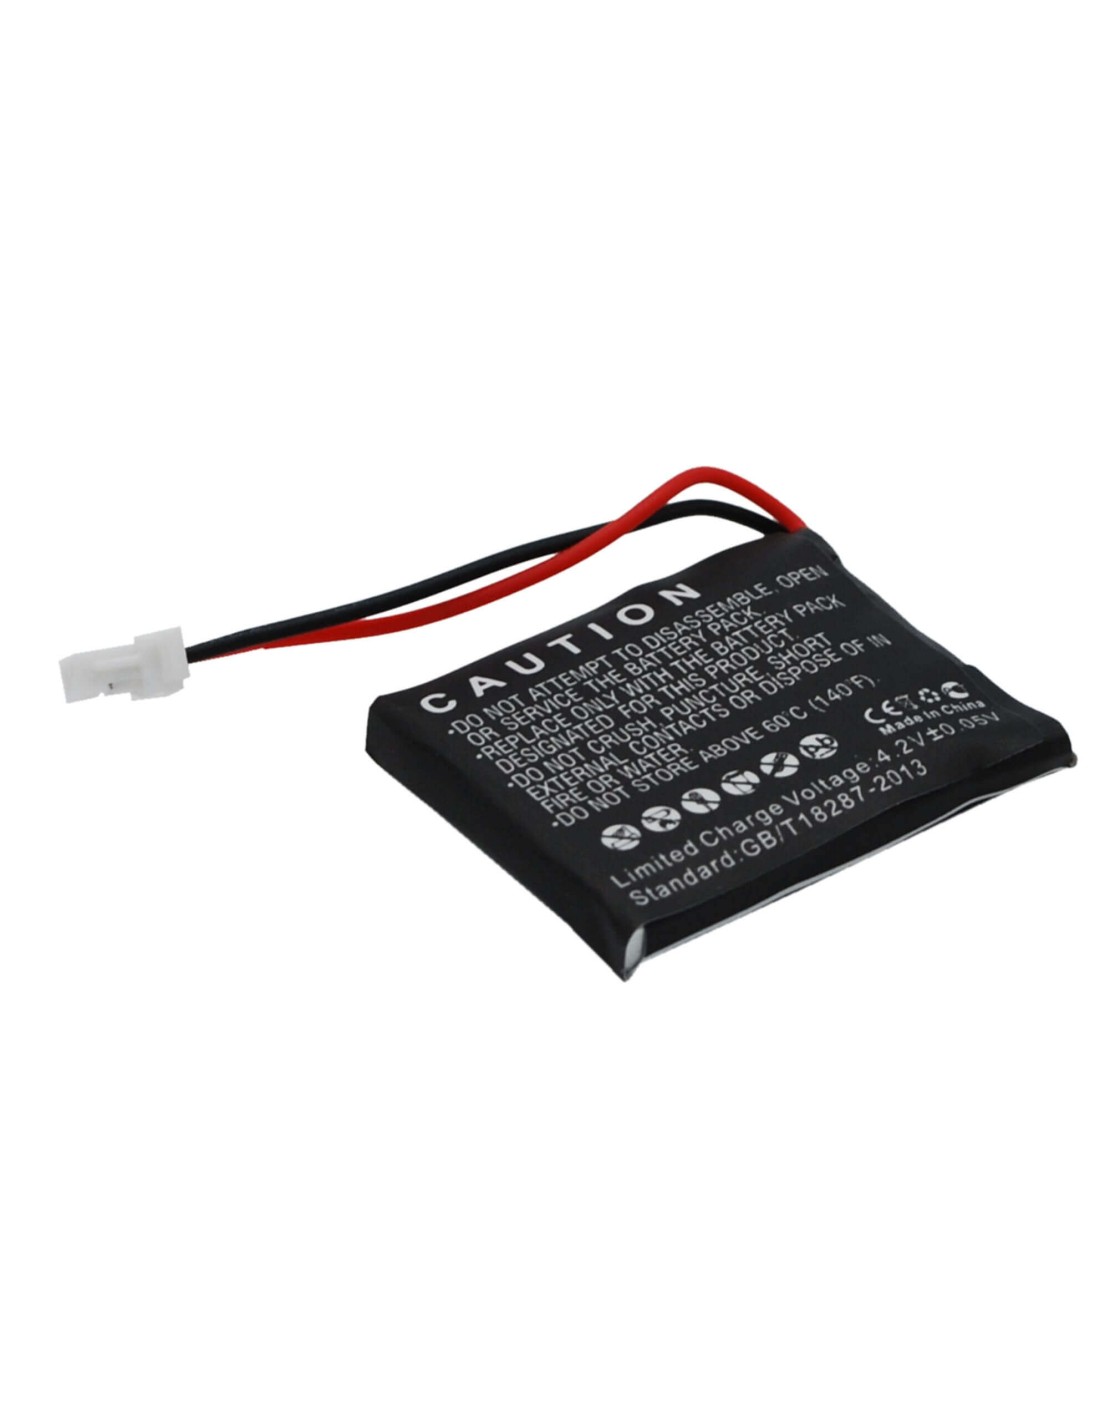 Battery for Nokia Hs-21w 3.7V, 150mAh - 0.56Wh